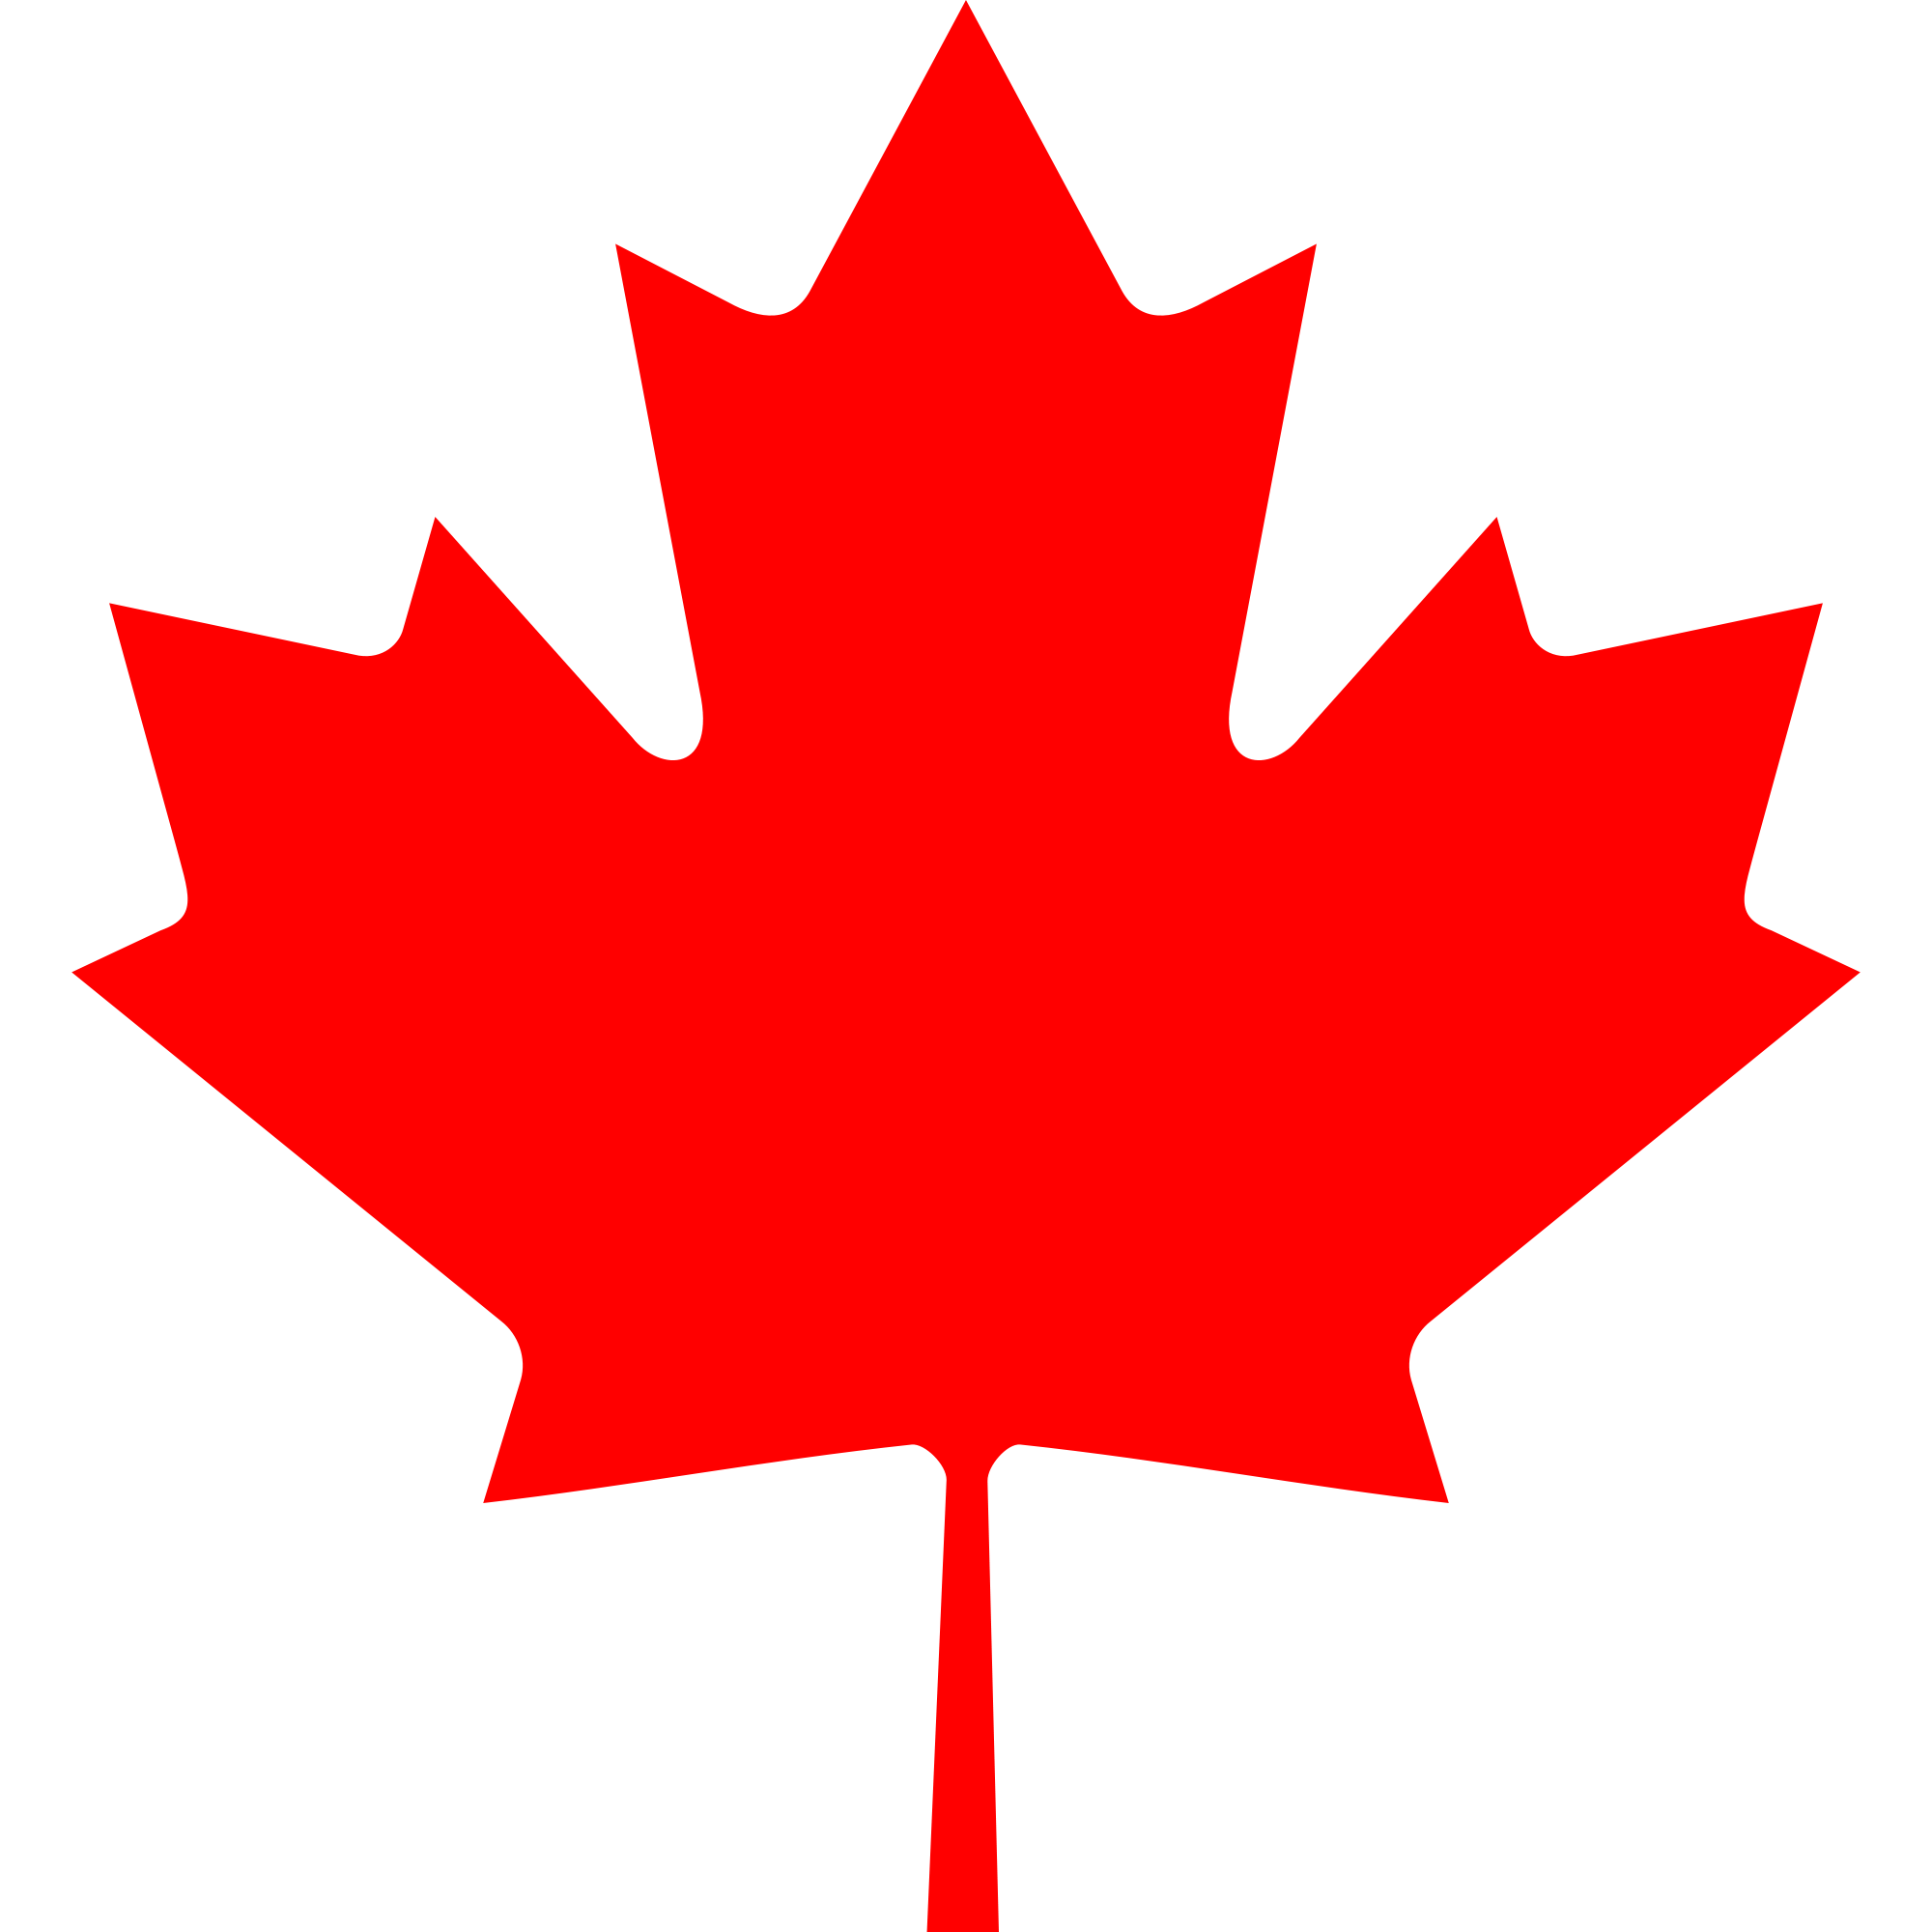 Canadian Maple Leaf Vector - ClipArt Best